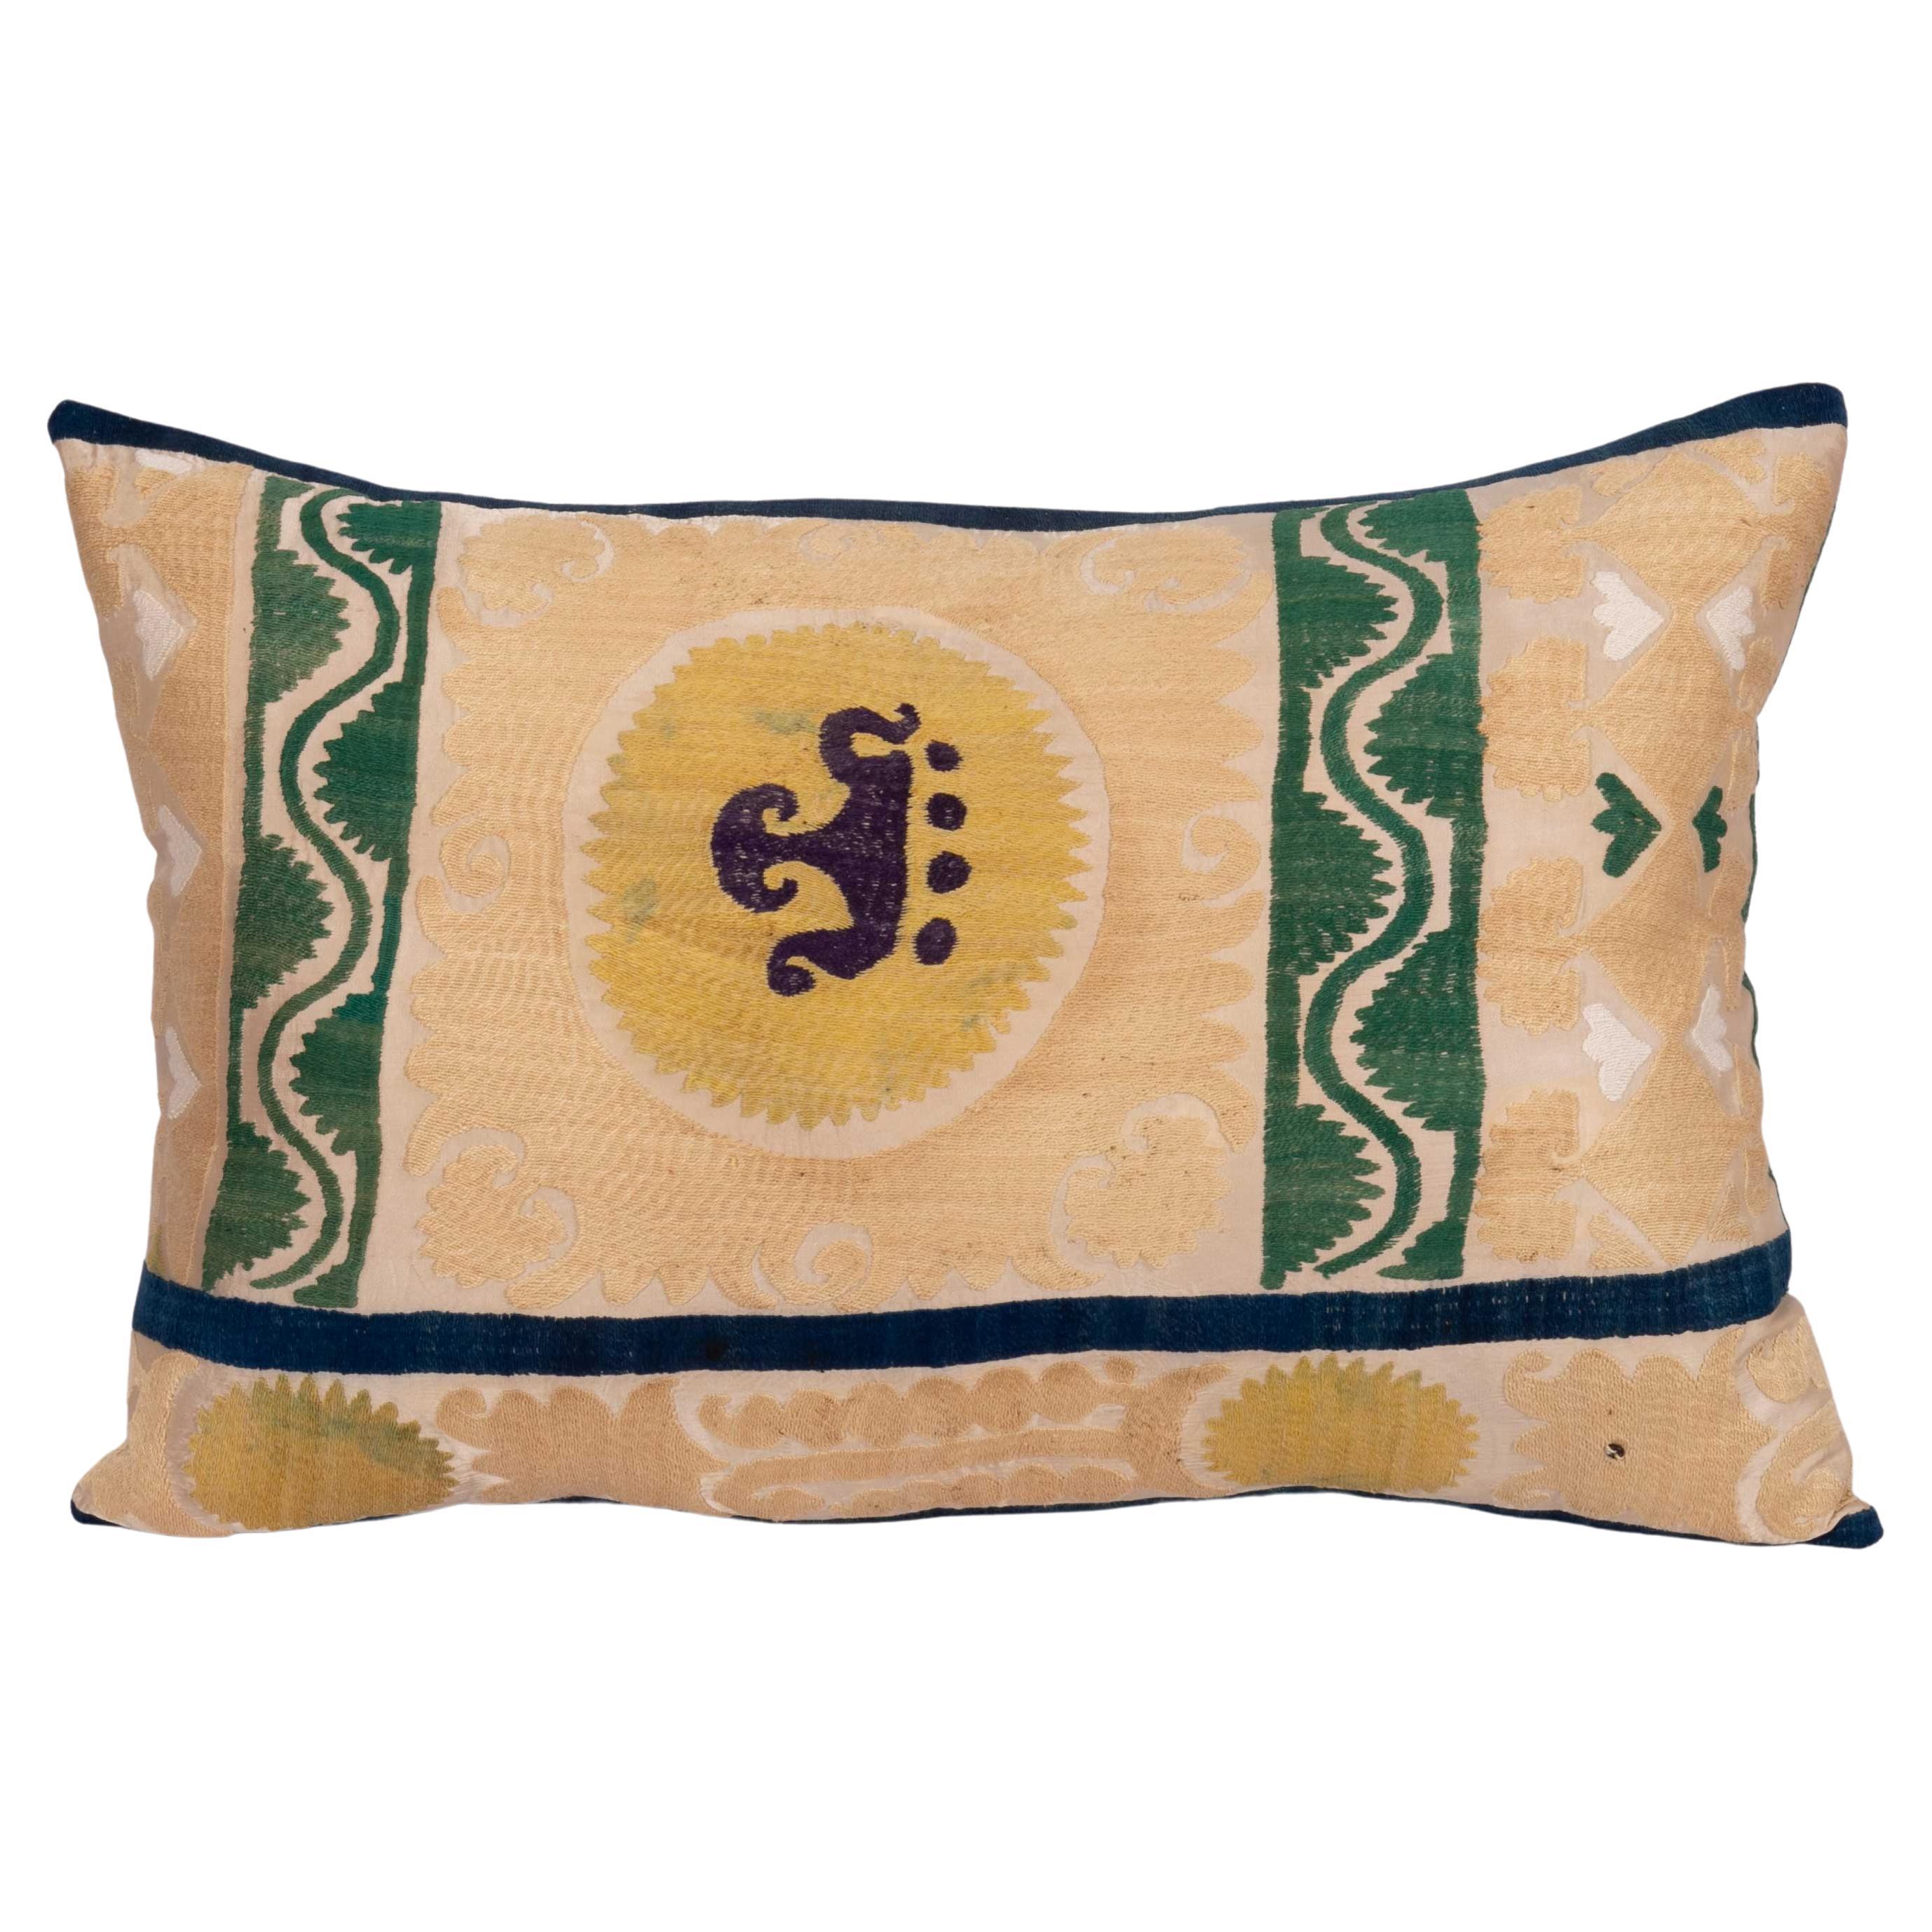 Suzani Pillow Case, Made from a Mid 20th C. Uzbek Suzani For Sale